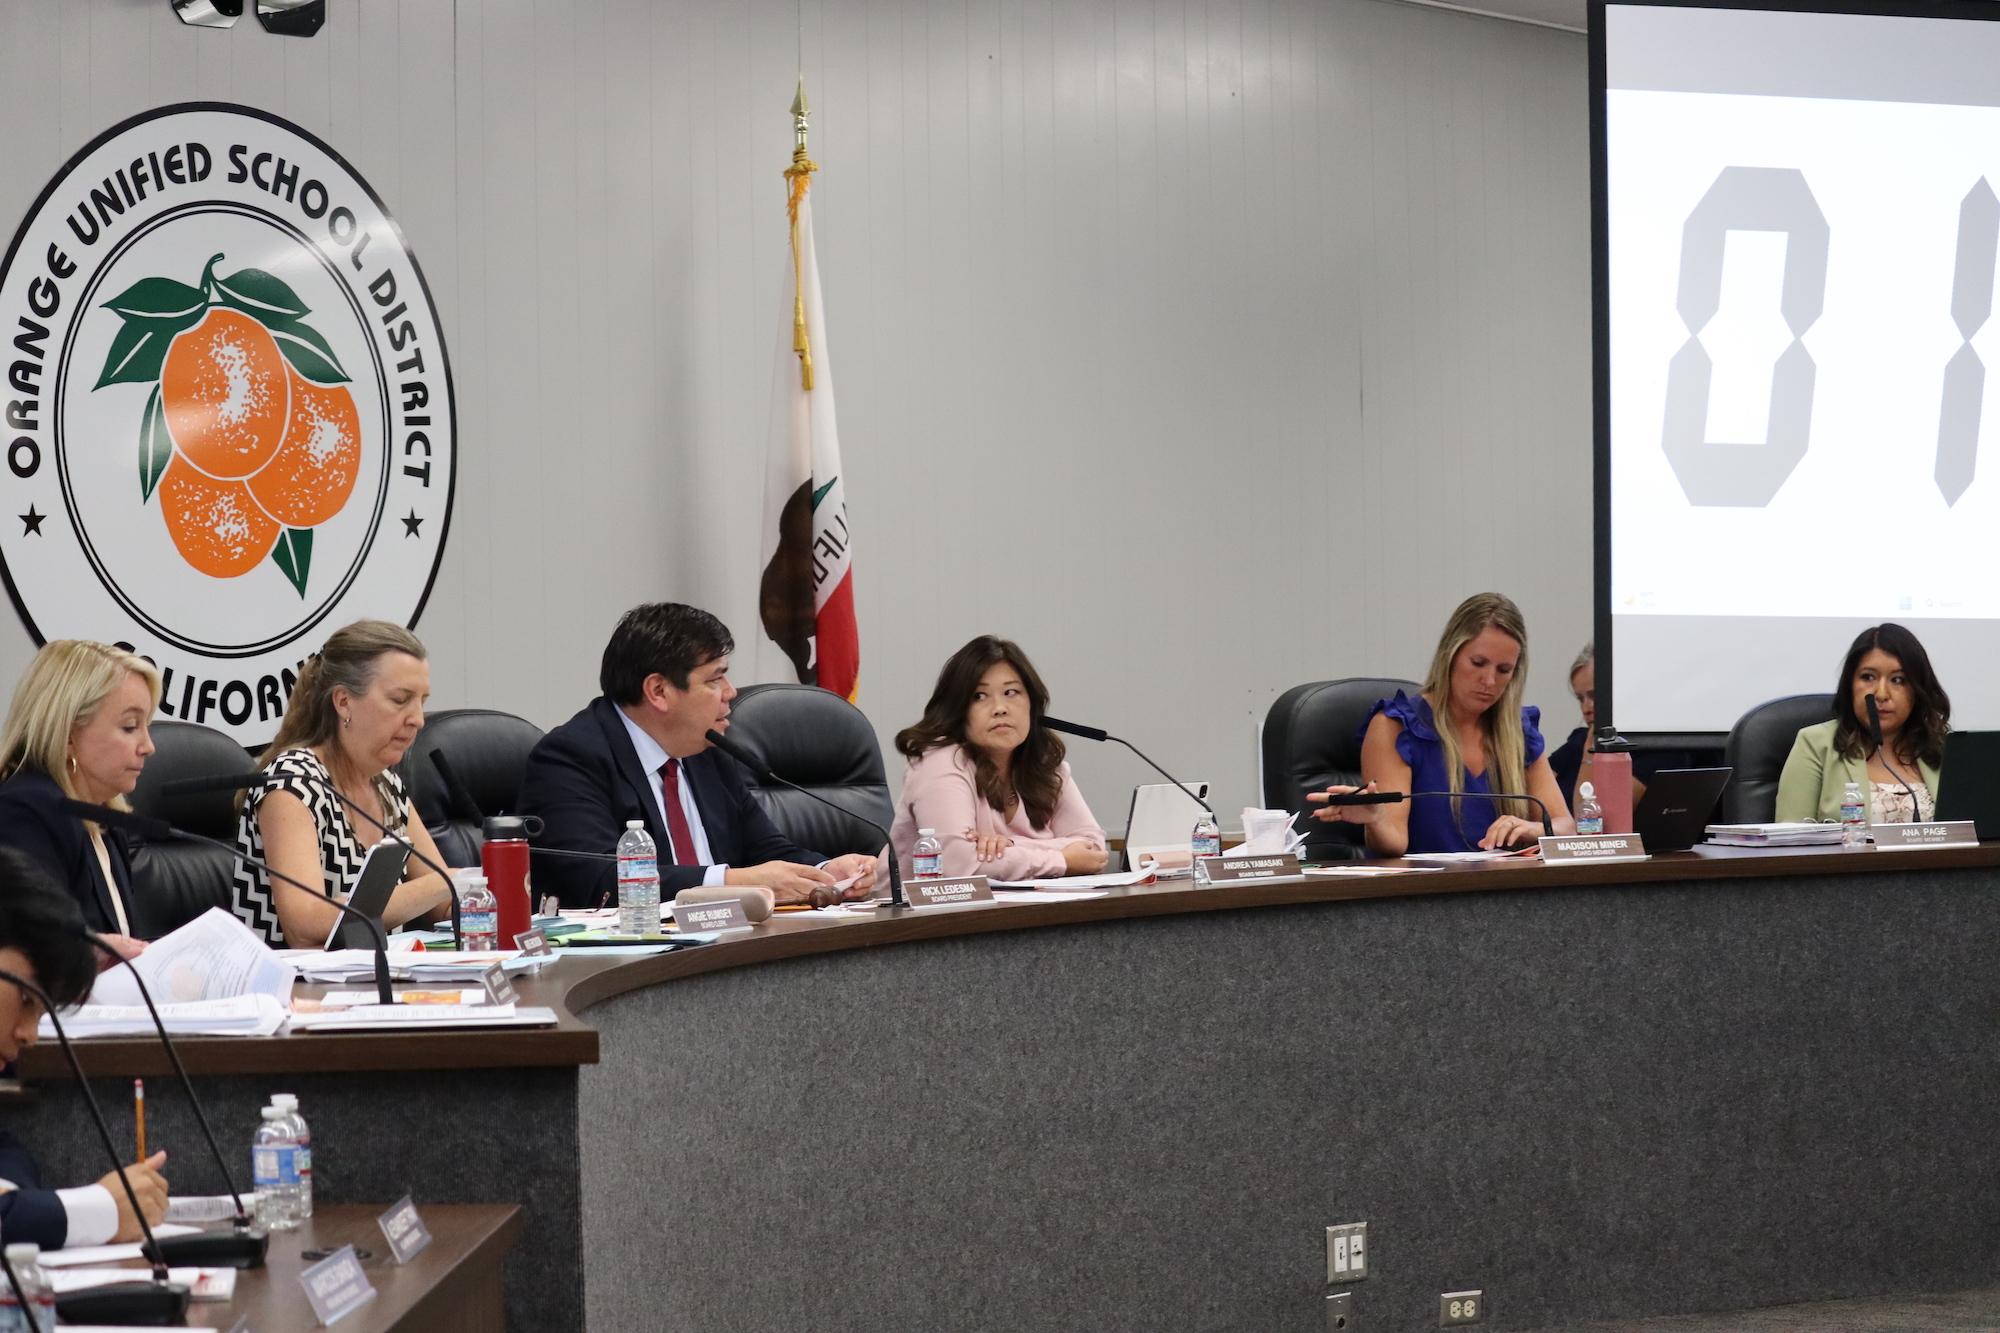 County Certifies Petitions to Recall Two Orange Unified Trustees